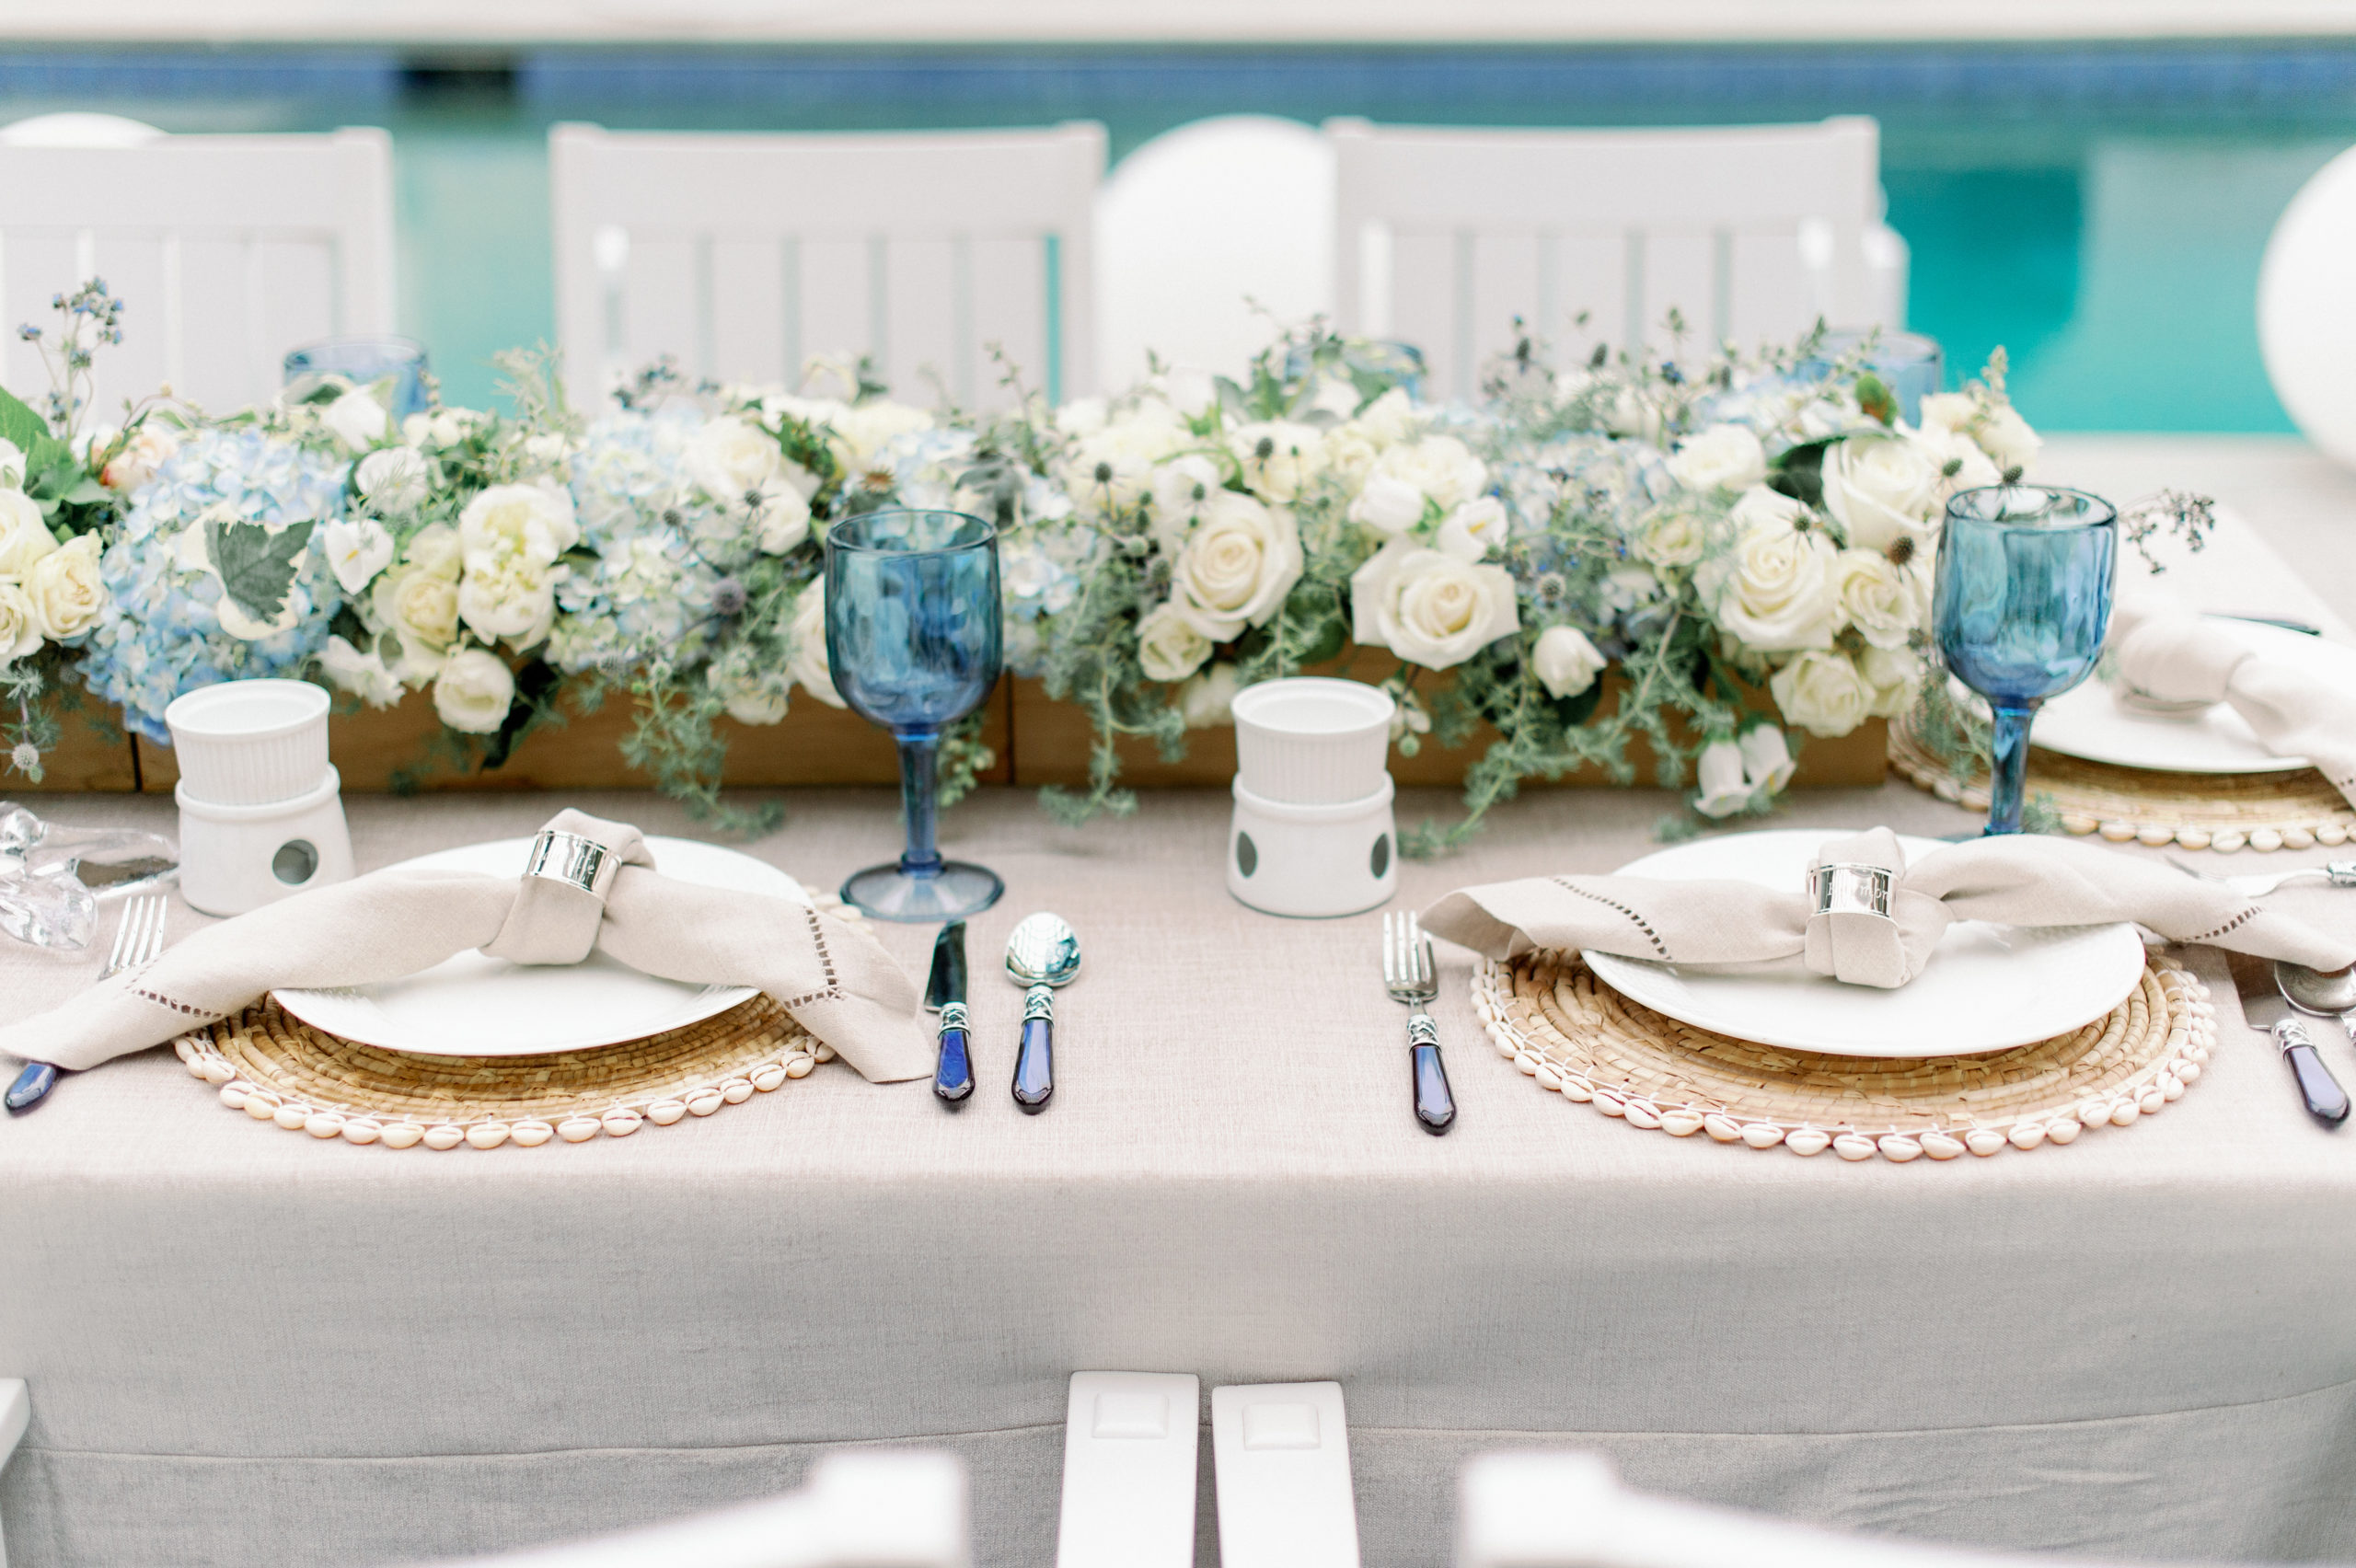 linen tablecloth with floral centerpiece and two place settings with linen napkins and silver napkin holders